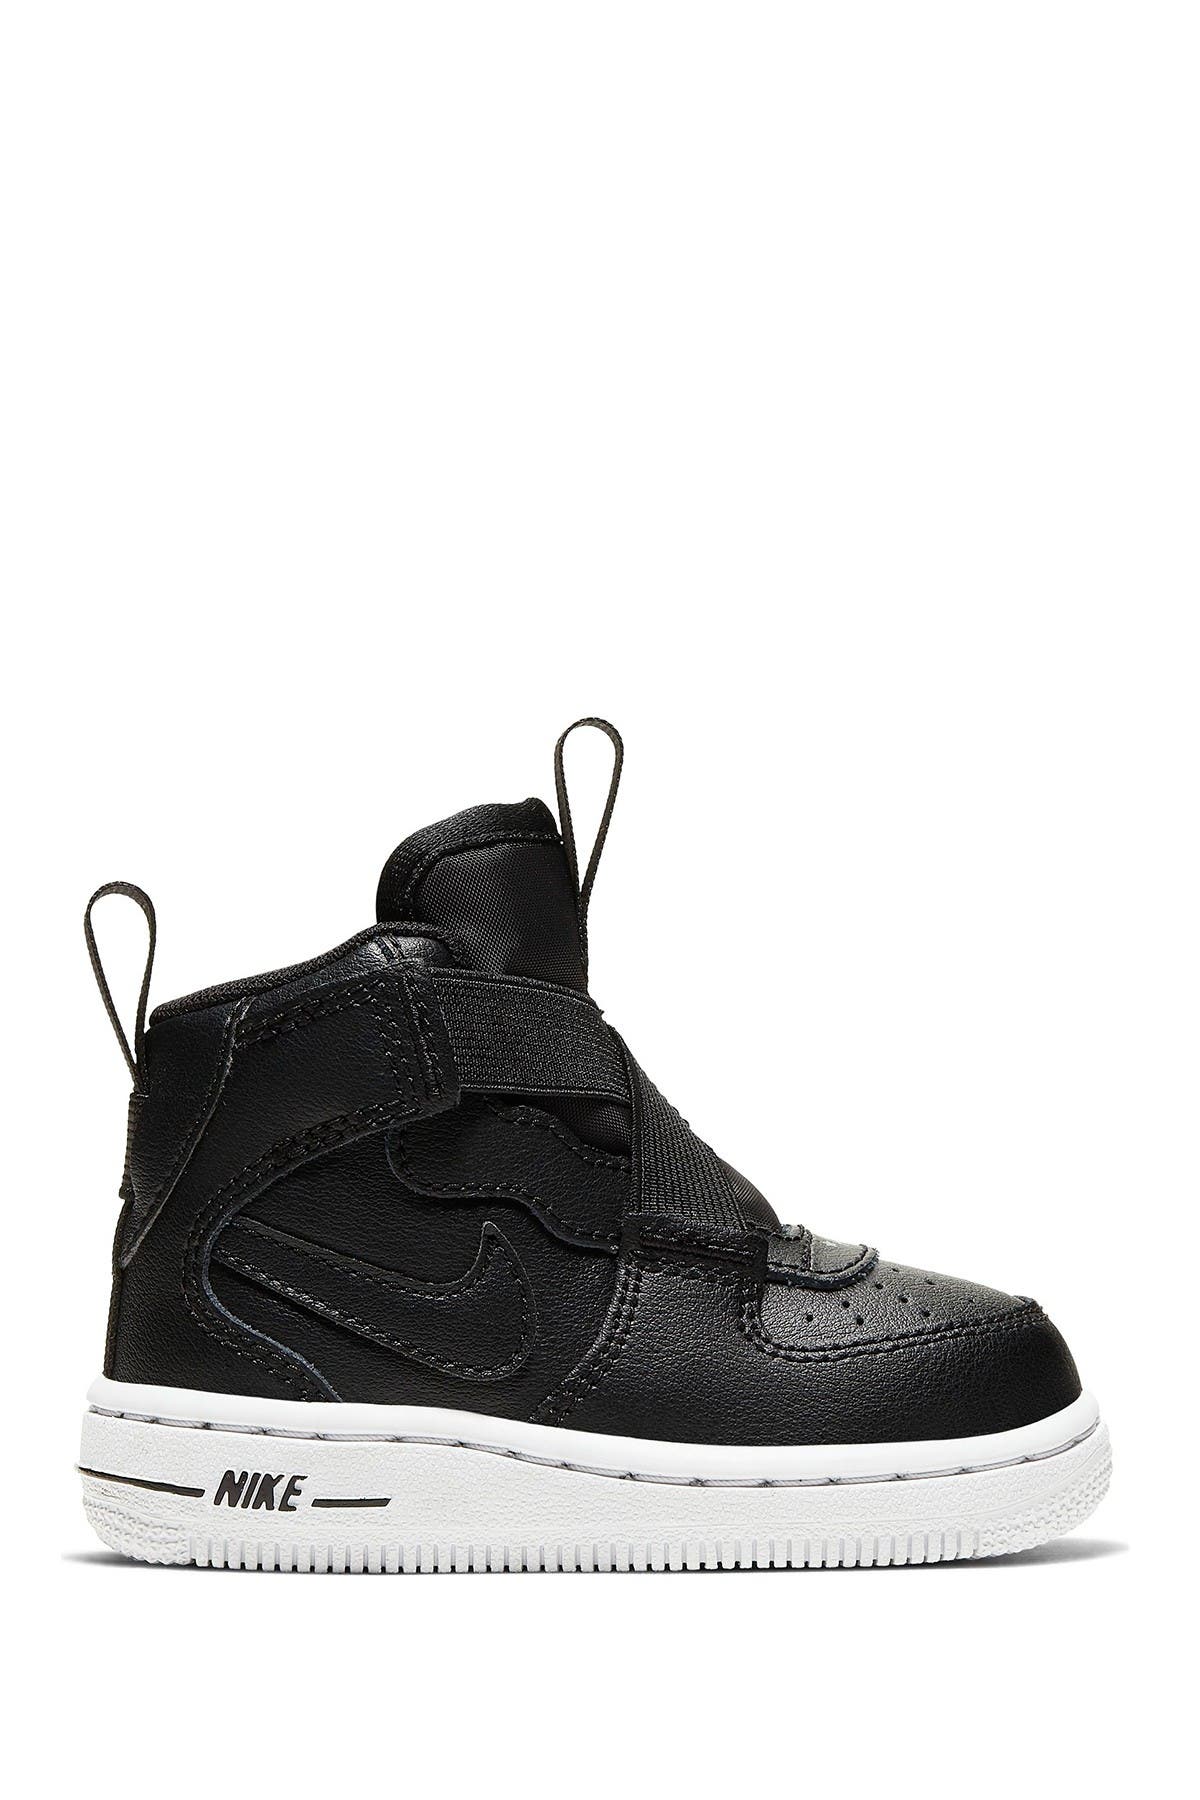 nike force 1 highness baby